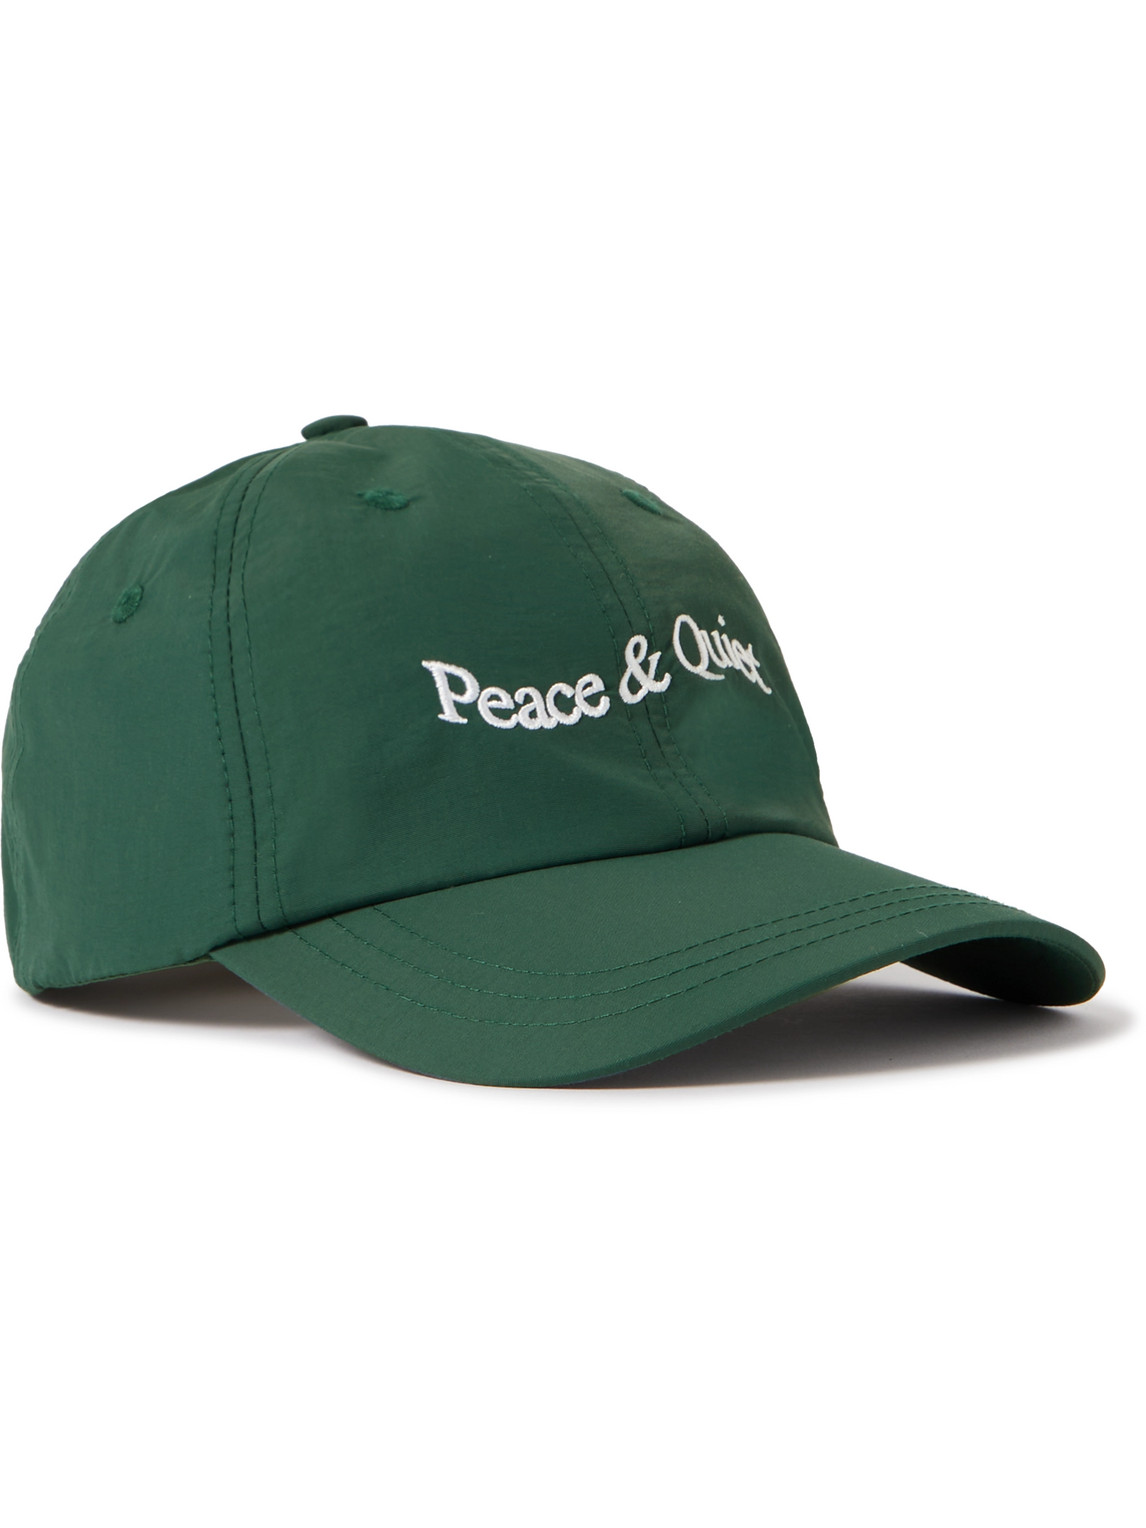 Museum Of Peace & Quiet Logo-Embroidered Shell Baseball Cap